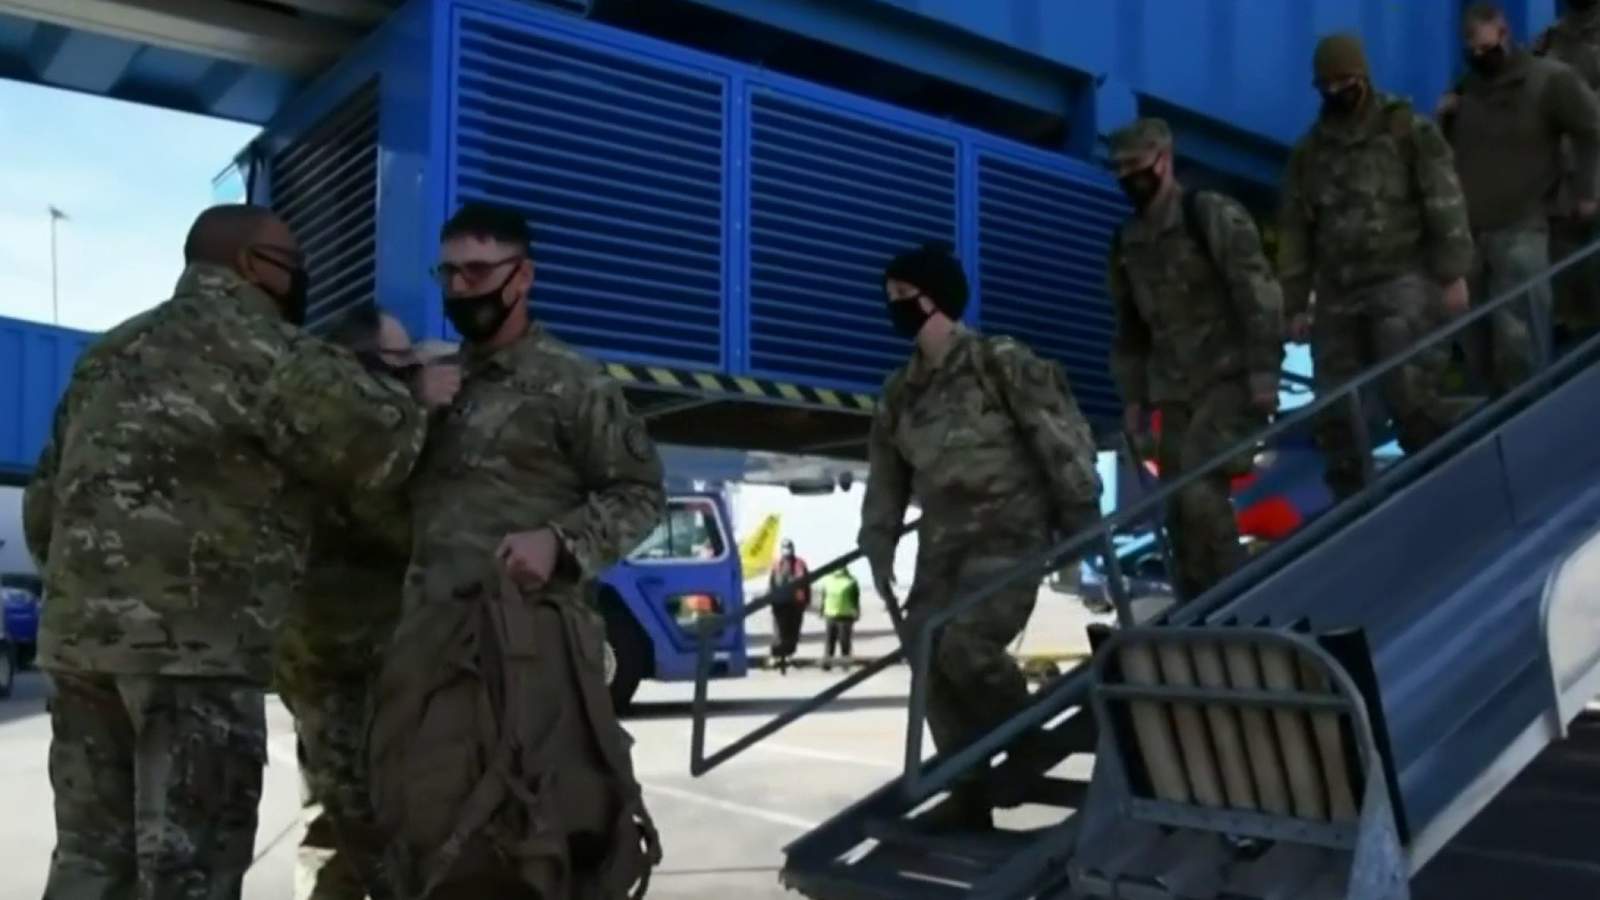 Michigan National Guard soldiers return home from Washington DC